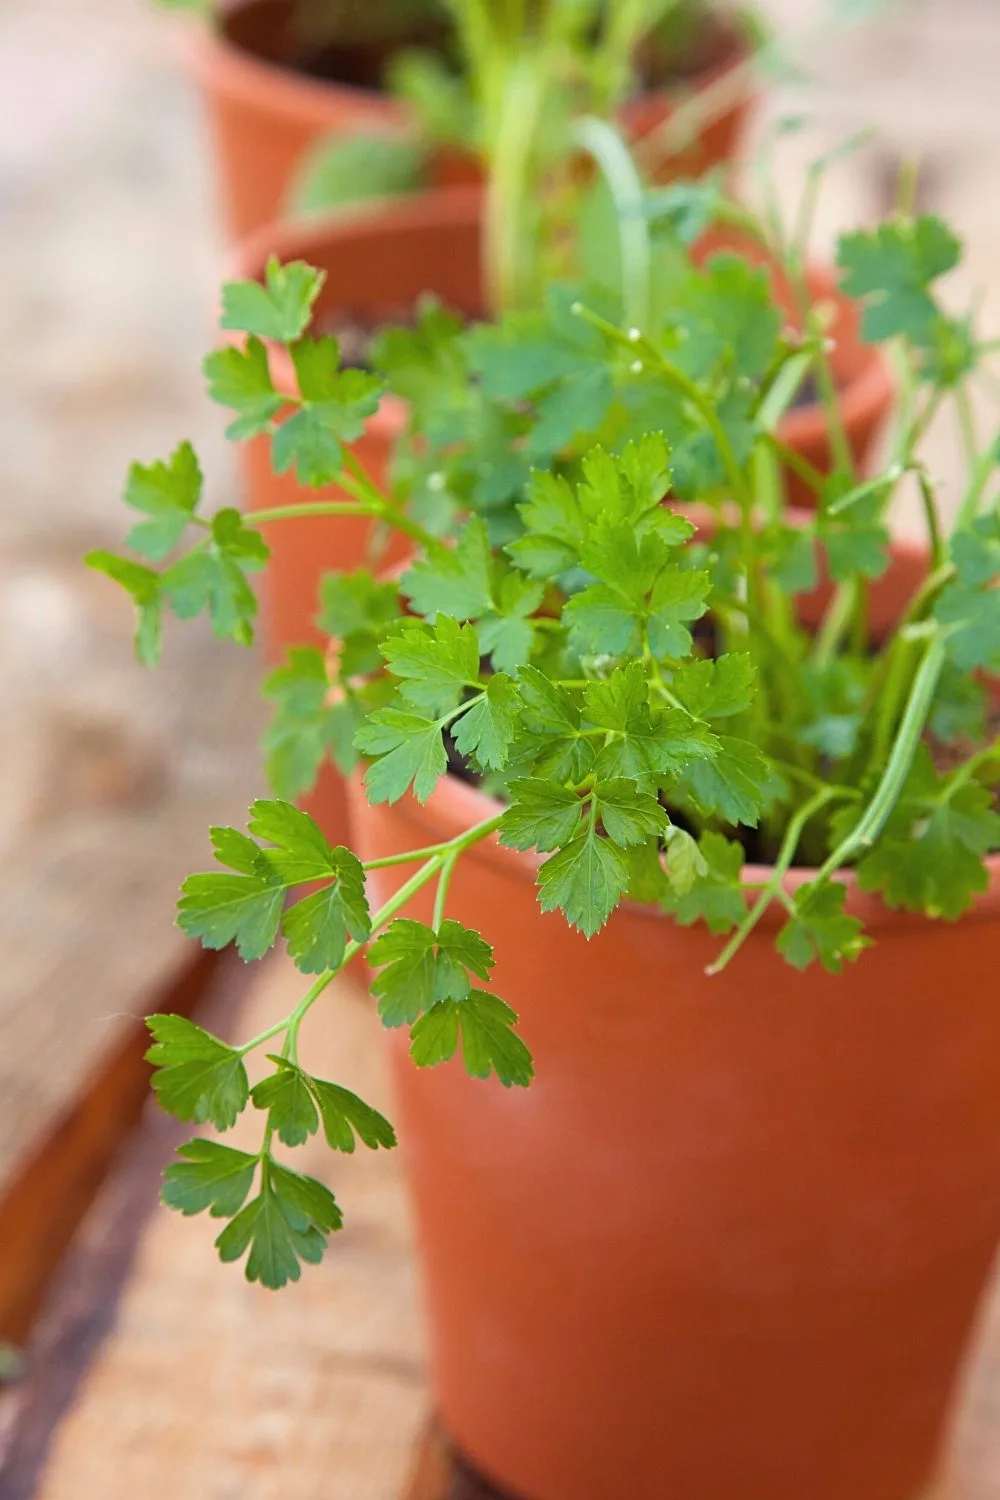 Whether from cuttings or seeds, Cilantro grows quickly when placed in the water